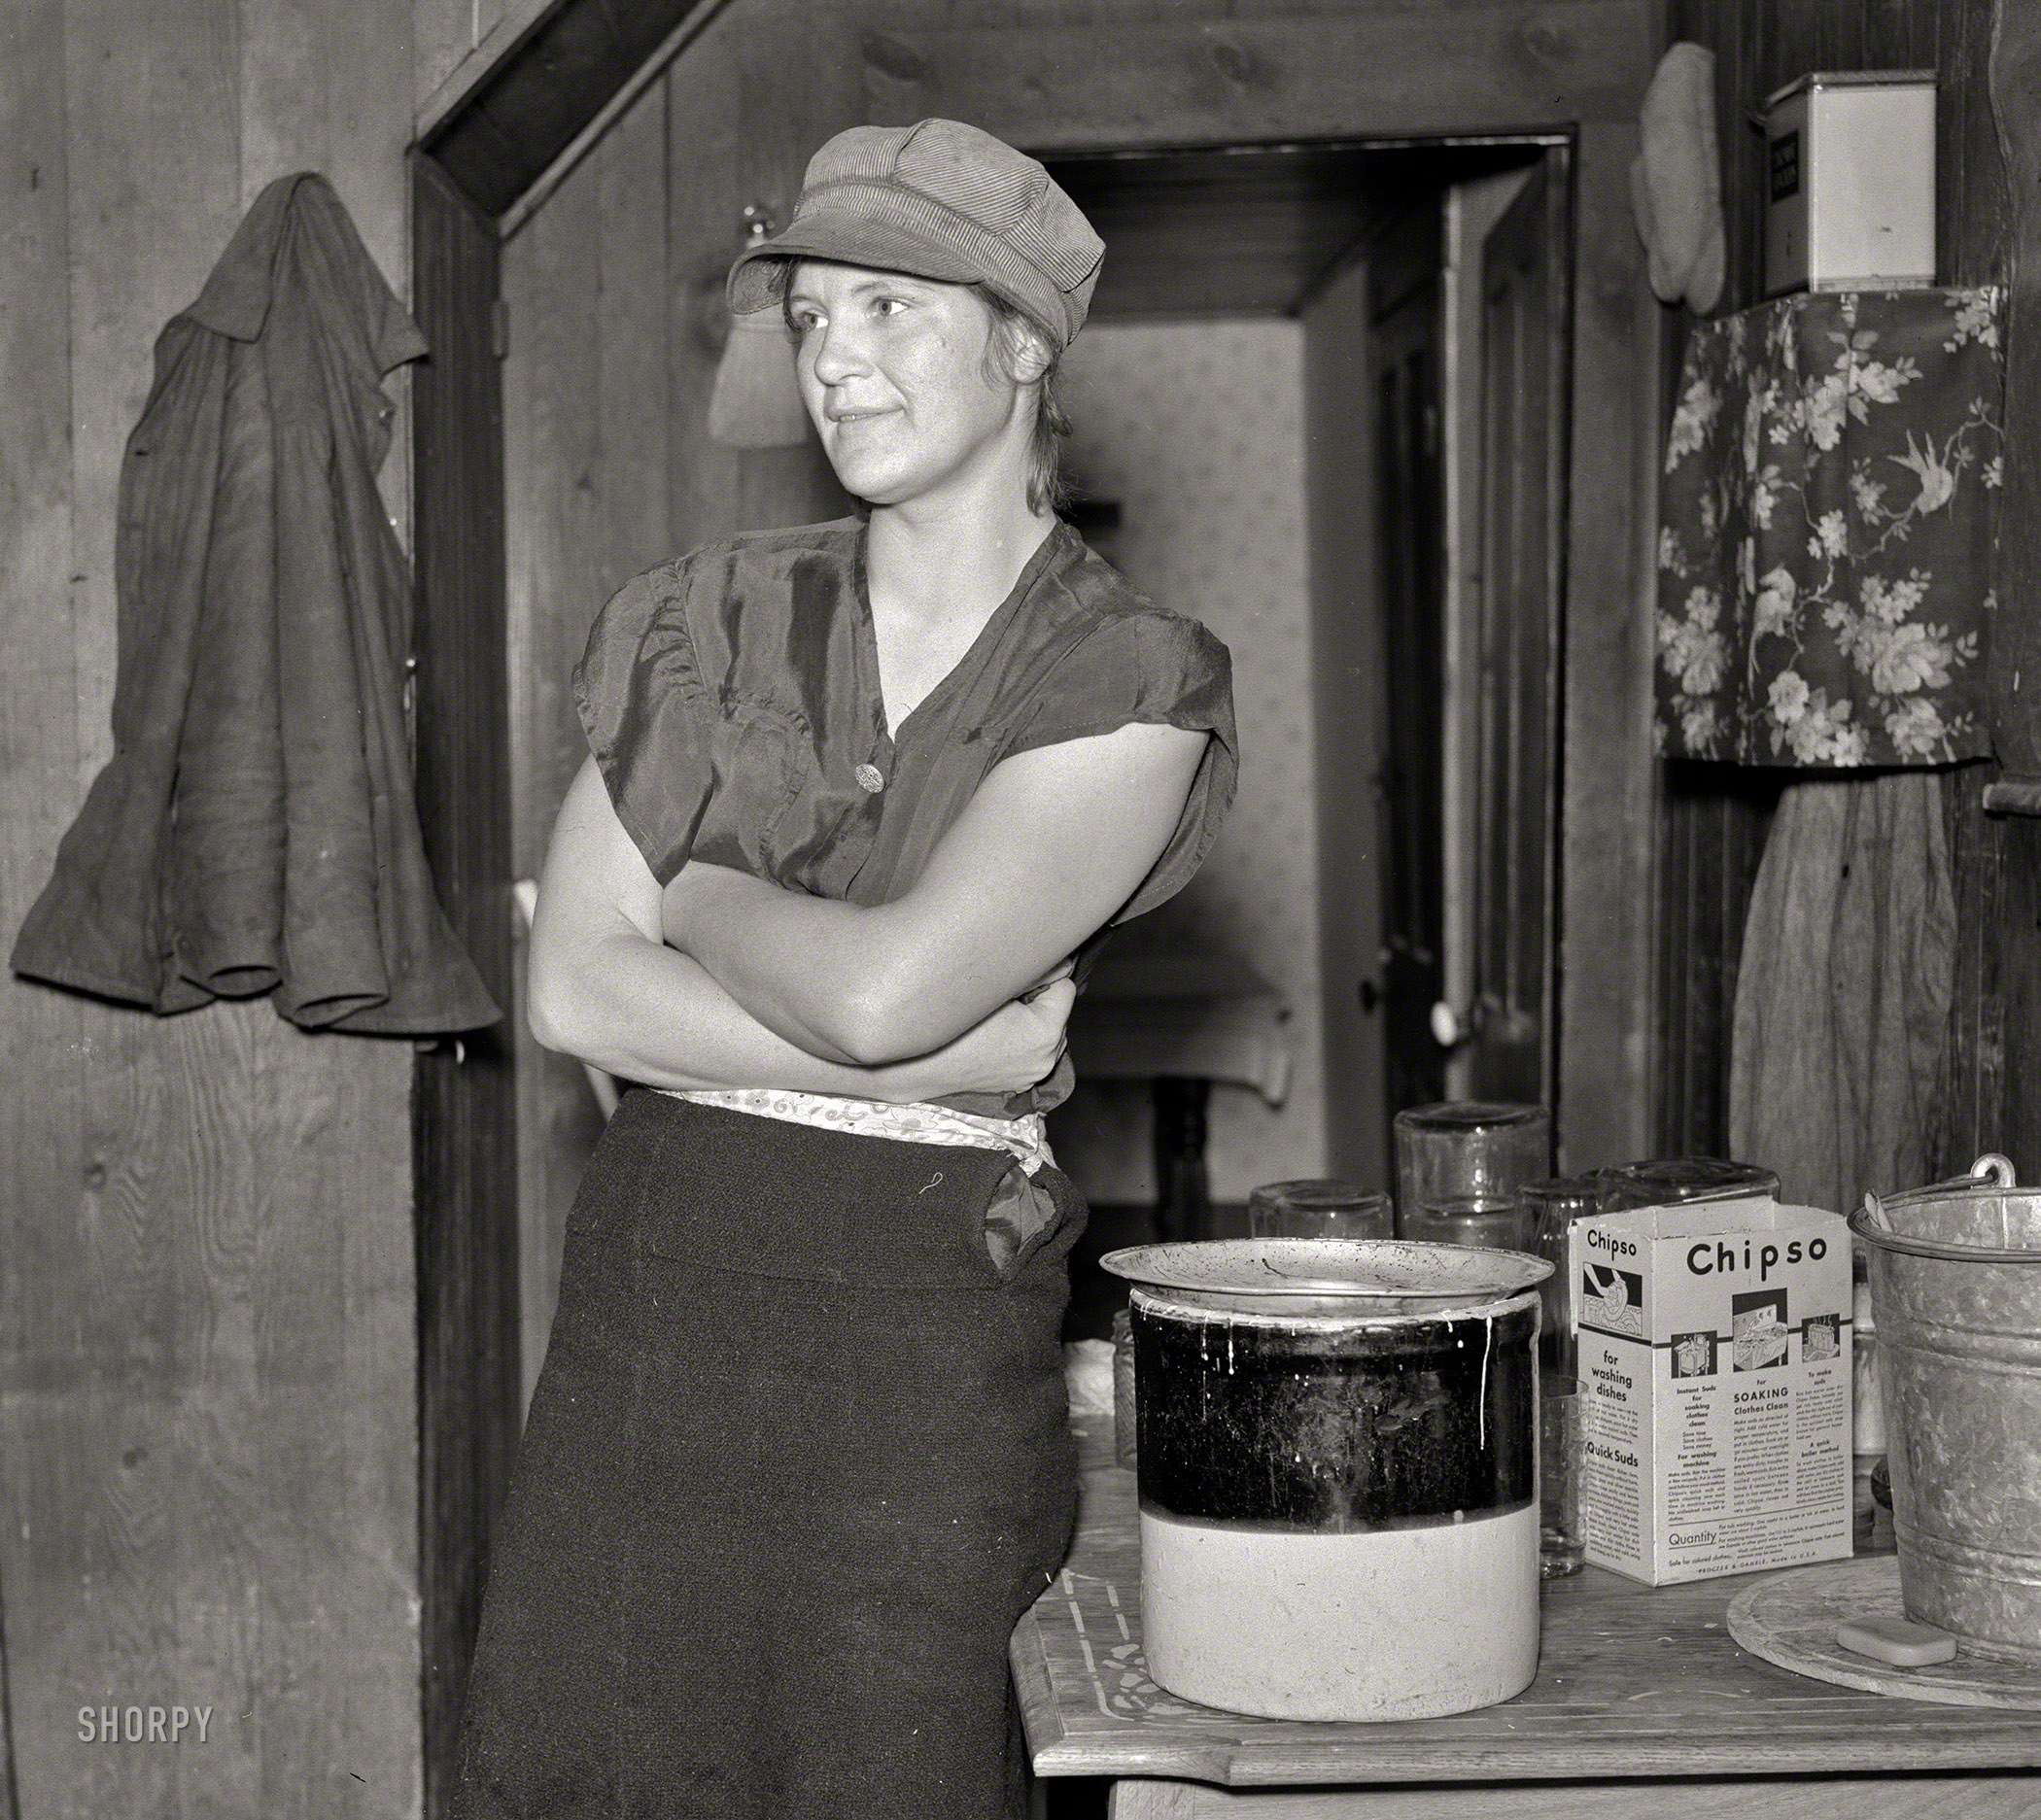 December 1937. "Daughter of Marvin 'Cub' Ryman, 94-year-old resident of Bear Hill, Garrett County, Maryland." Medium format acetate negative by Arthur Rothstein for the Farm Security Administration. View full size.